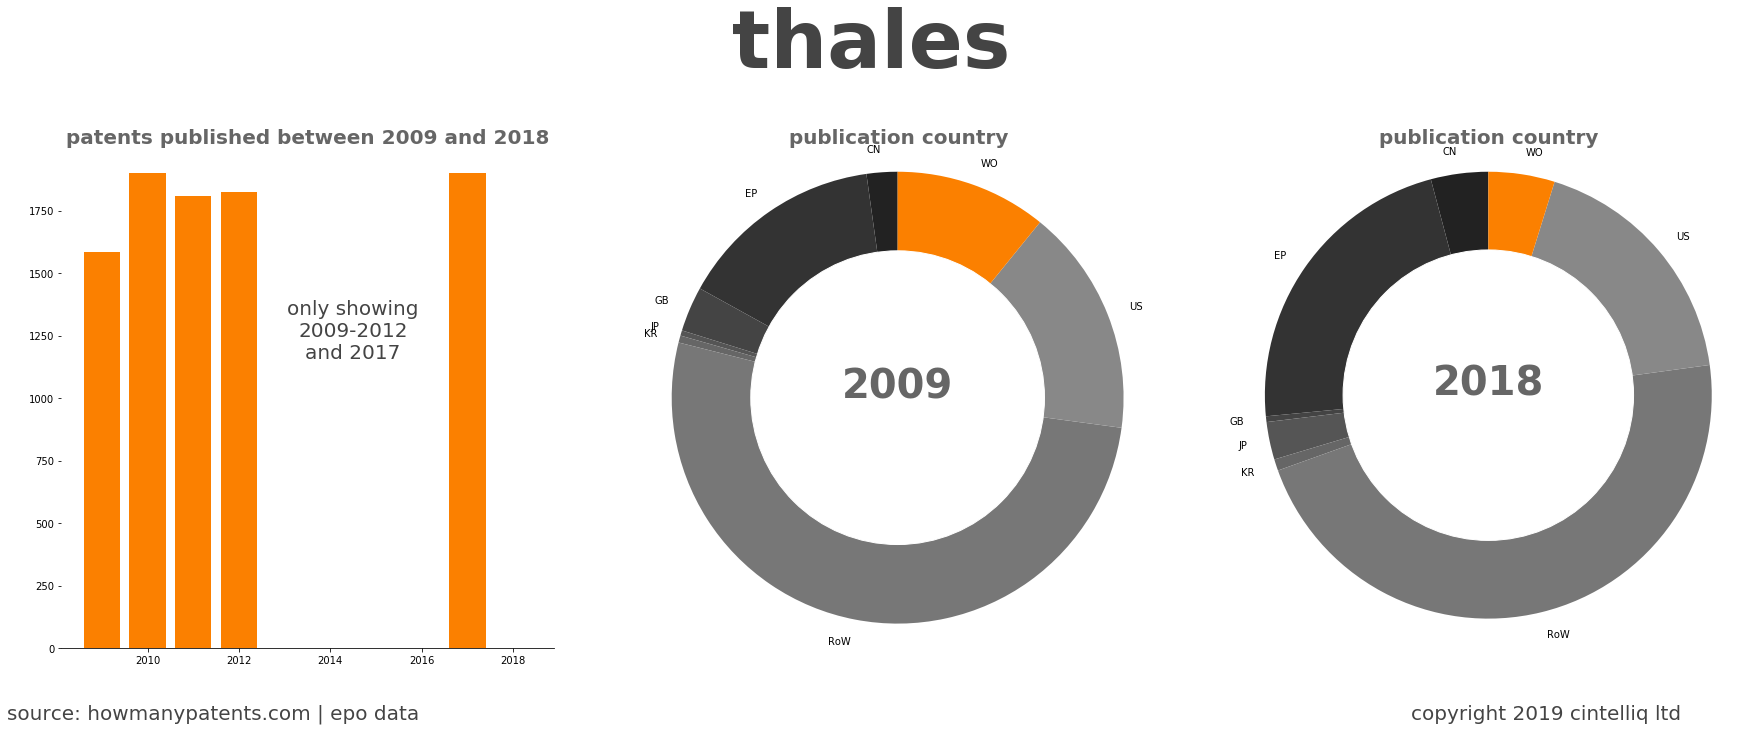 summary of patents for Thales